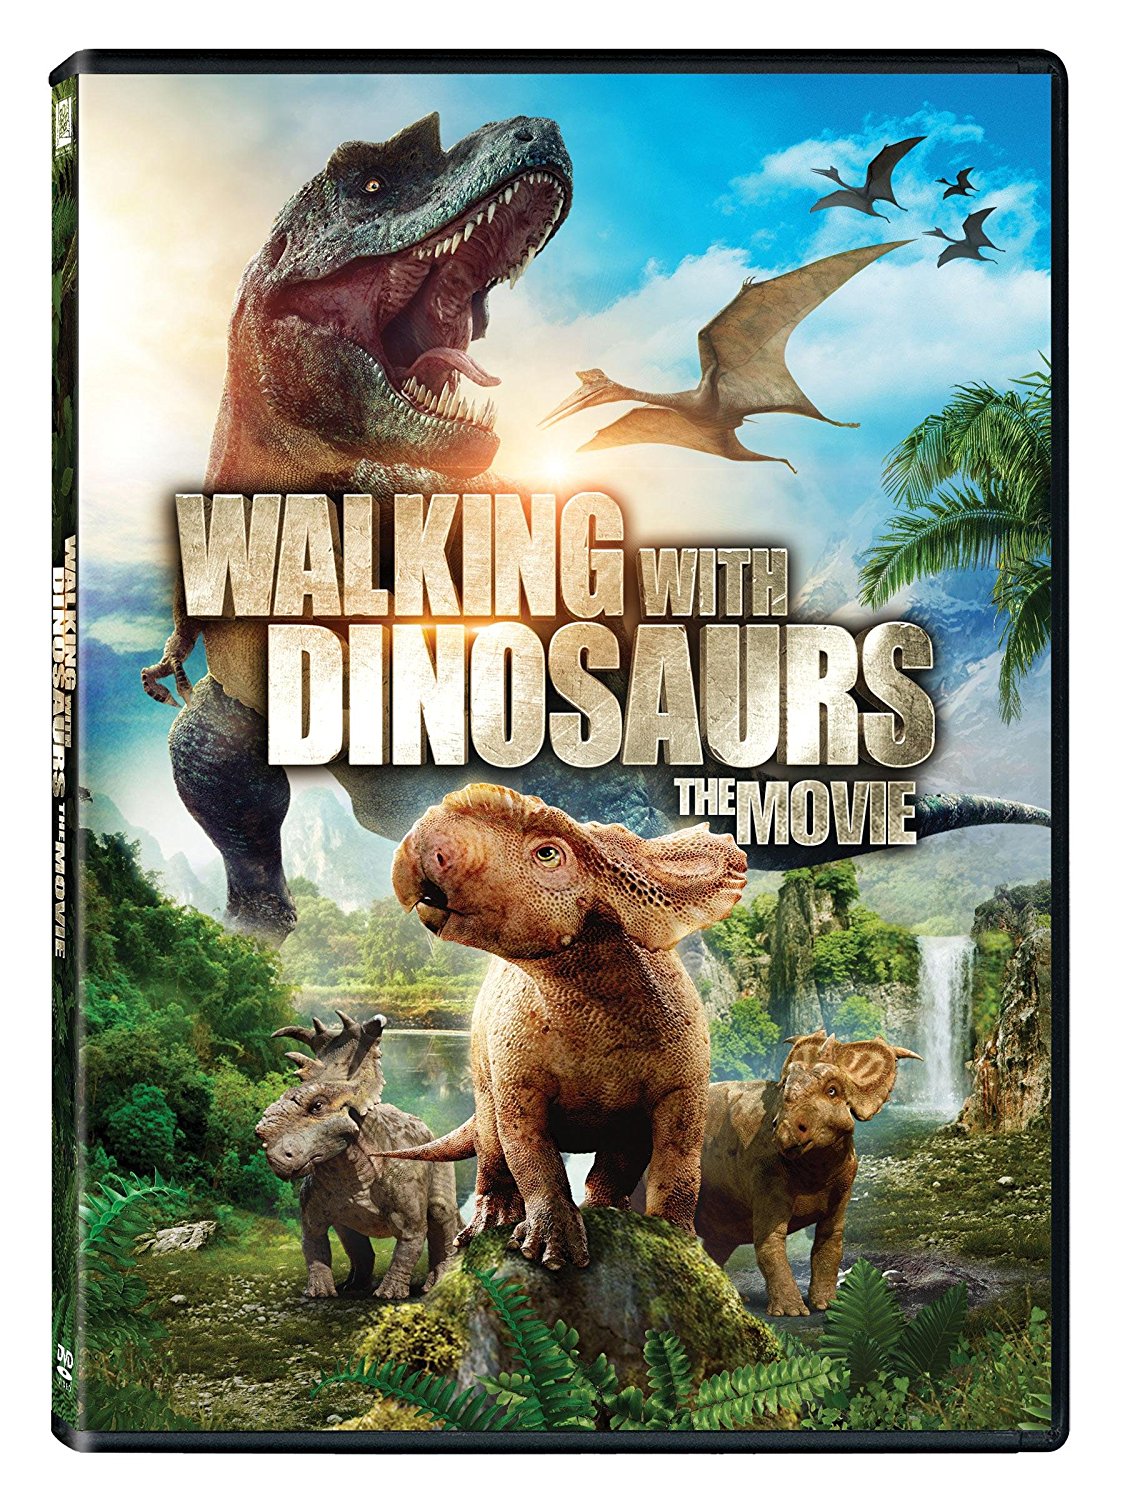 Walking with dinosaurs : the movie